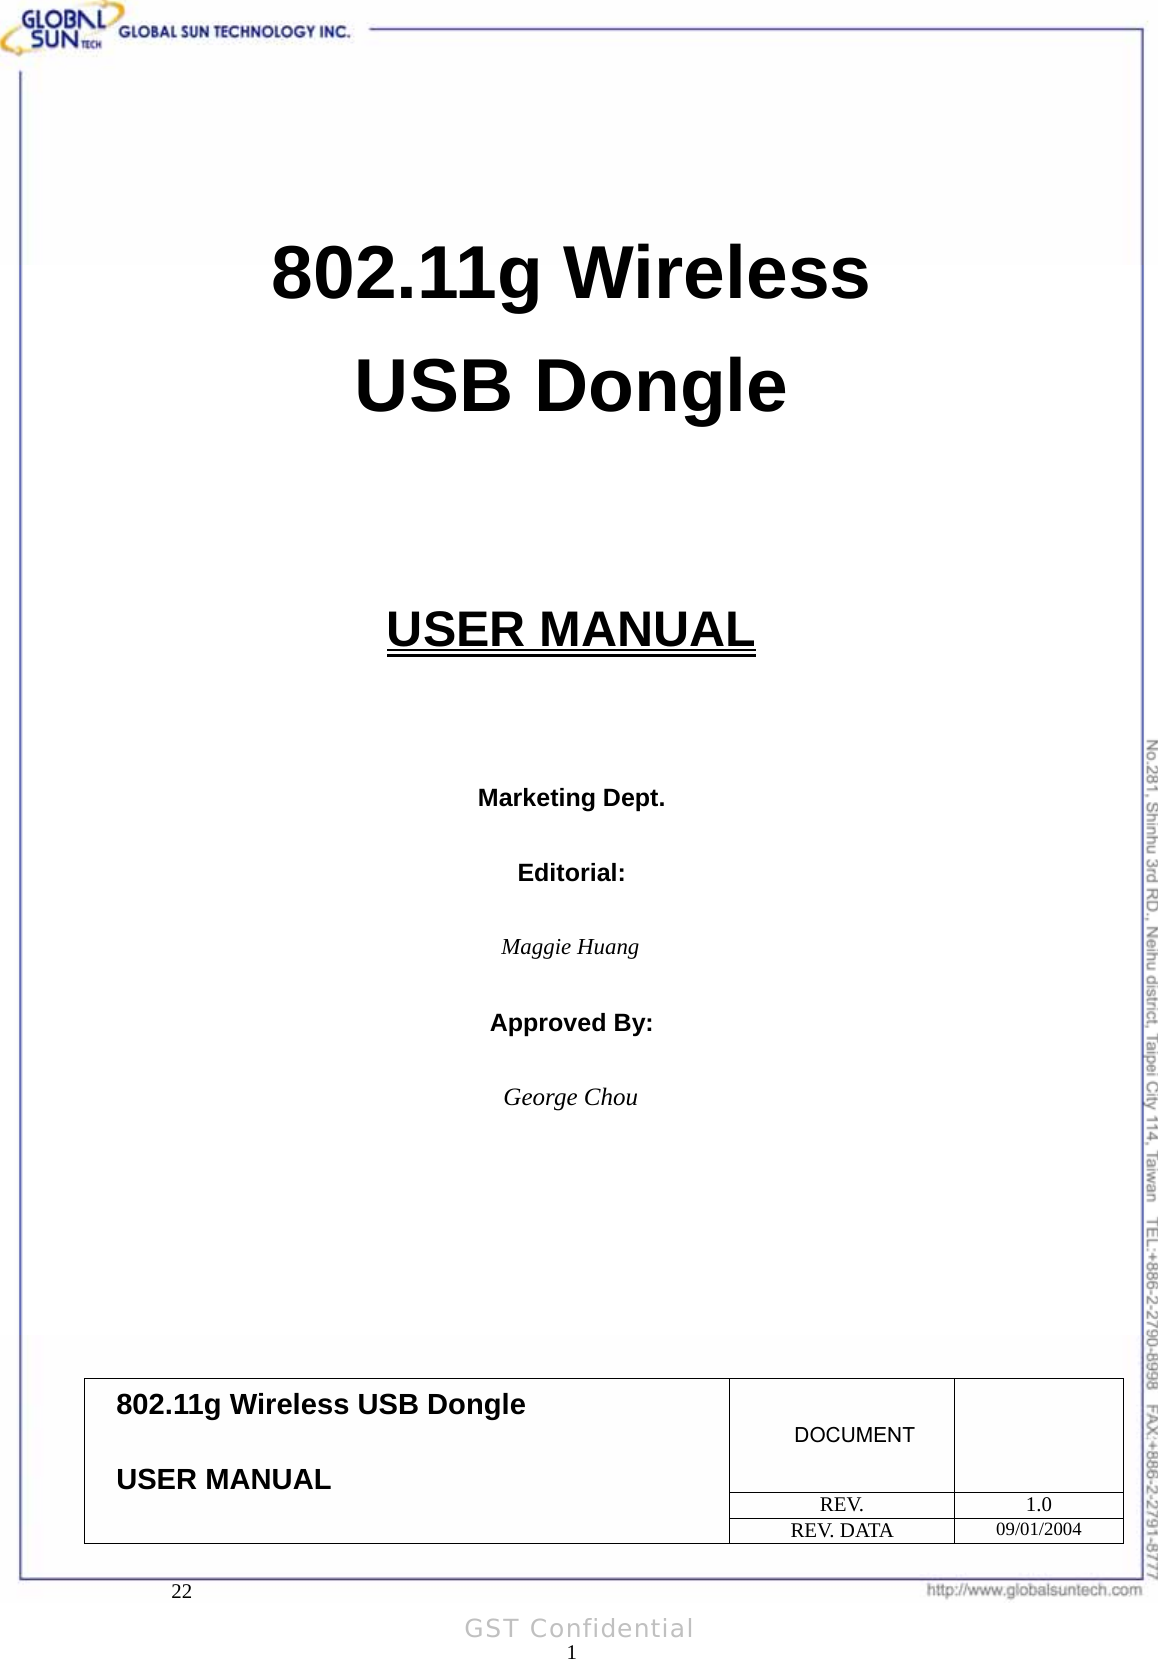  Product: IEEE 802.11g 54Mbps Wireless USB Dongle Model: WL UD 2454 18S0   802.11g Wireless USB Dongle   USER MANUAL    Marketing Dept.  Editorial:  Maggie Huang  Approved By:  George Chou        DOCUMENT  REV. 1.0 802.11g Wireless USB Dongle USER MANUAL REV. DATA  09/01/2004     22 1GST Confidential 